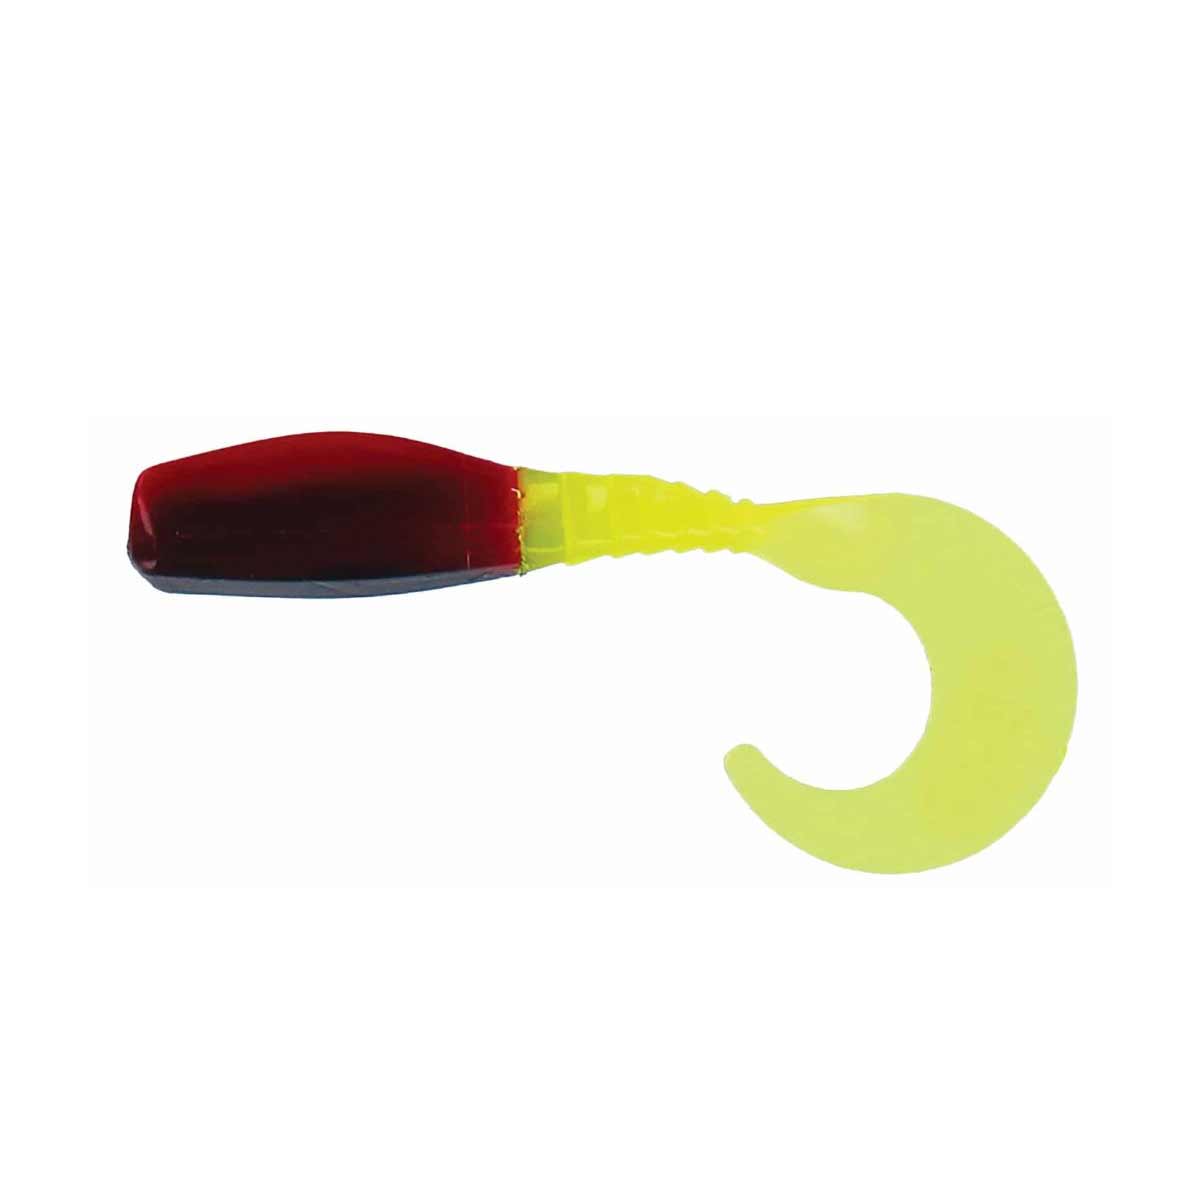 Curly Tail Crappie Minnow_Black/Red/Chartreuse